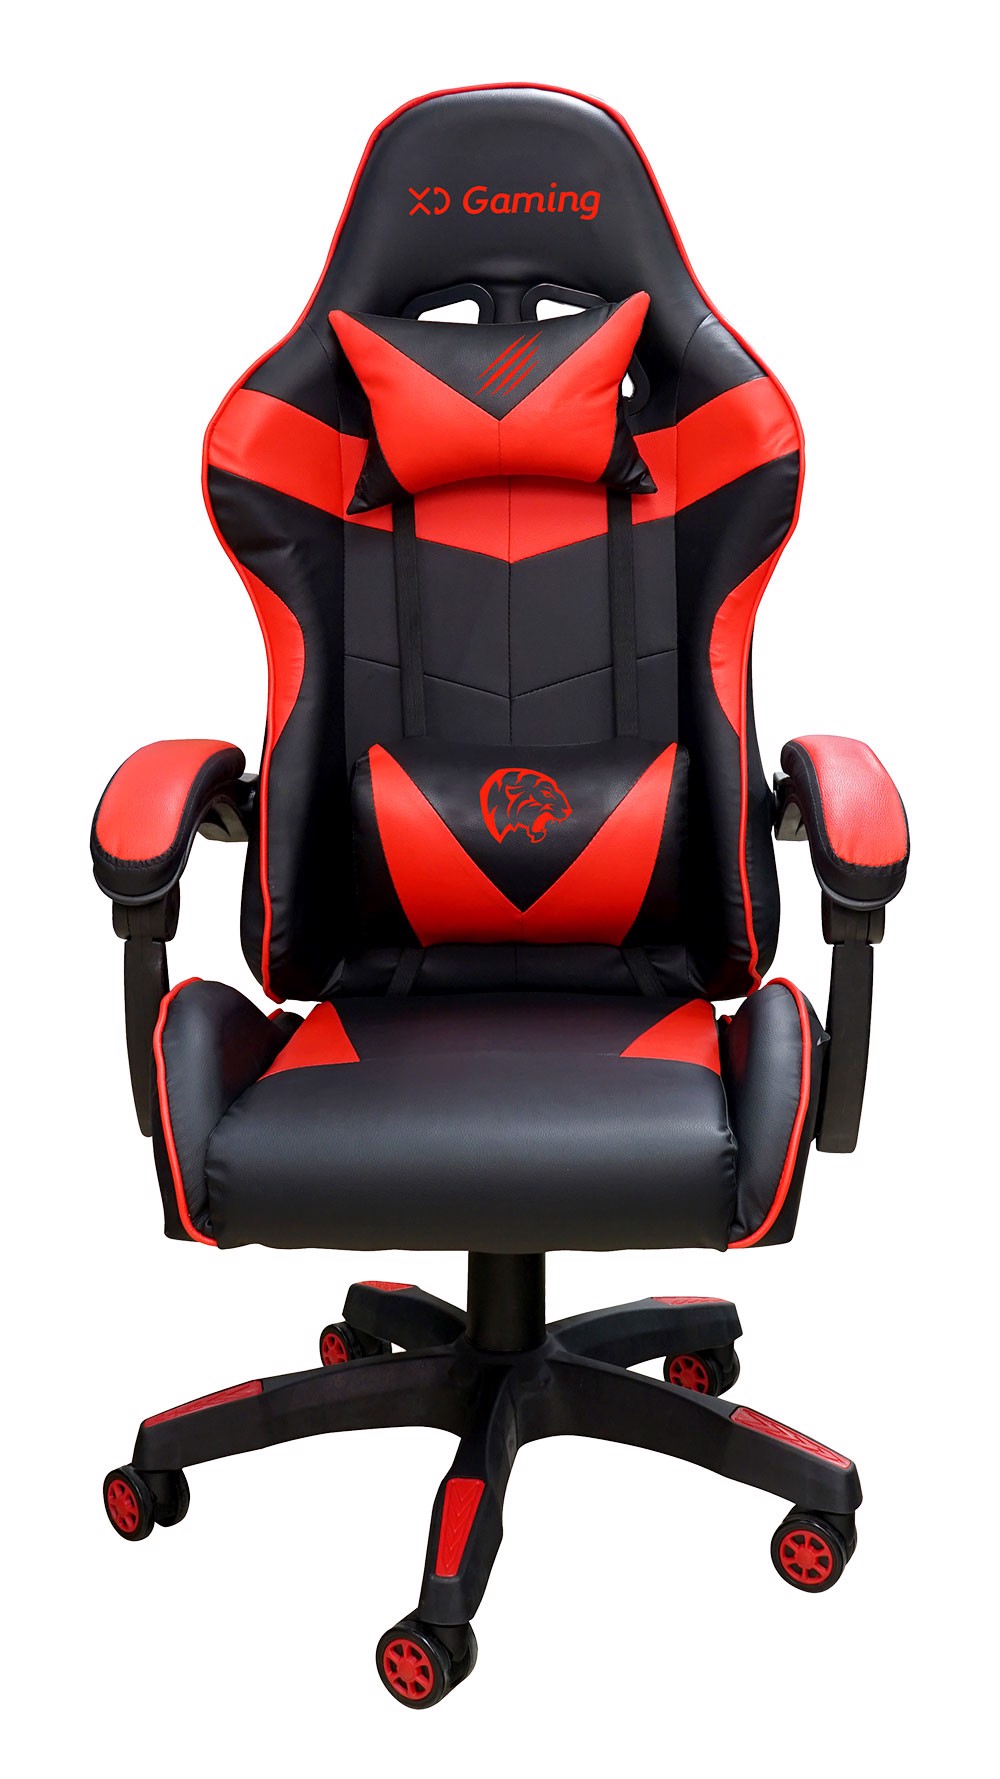 https://www.e-stayon.com/images/thumbs/0226588_xd-gamer-chair-sedia-gamer.jpeg